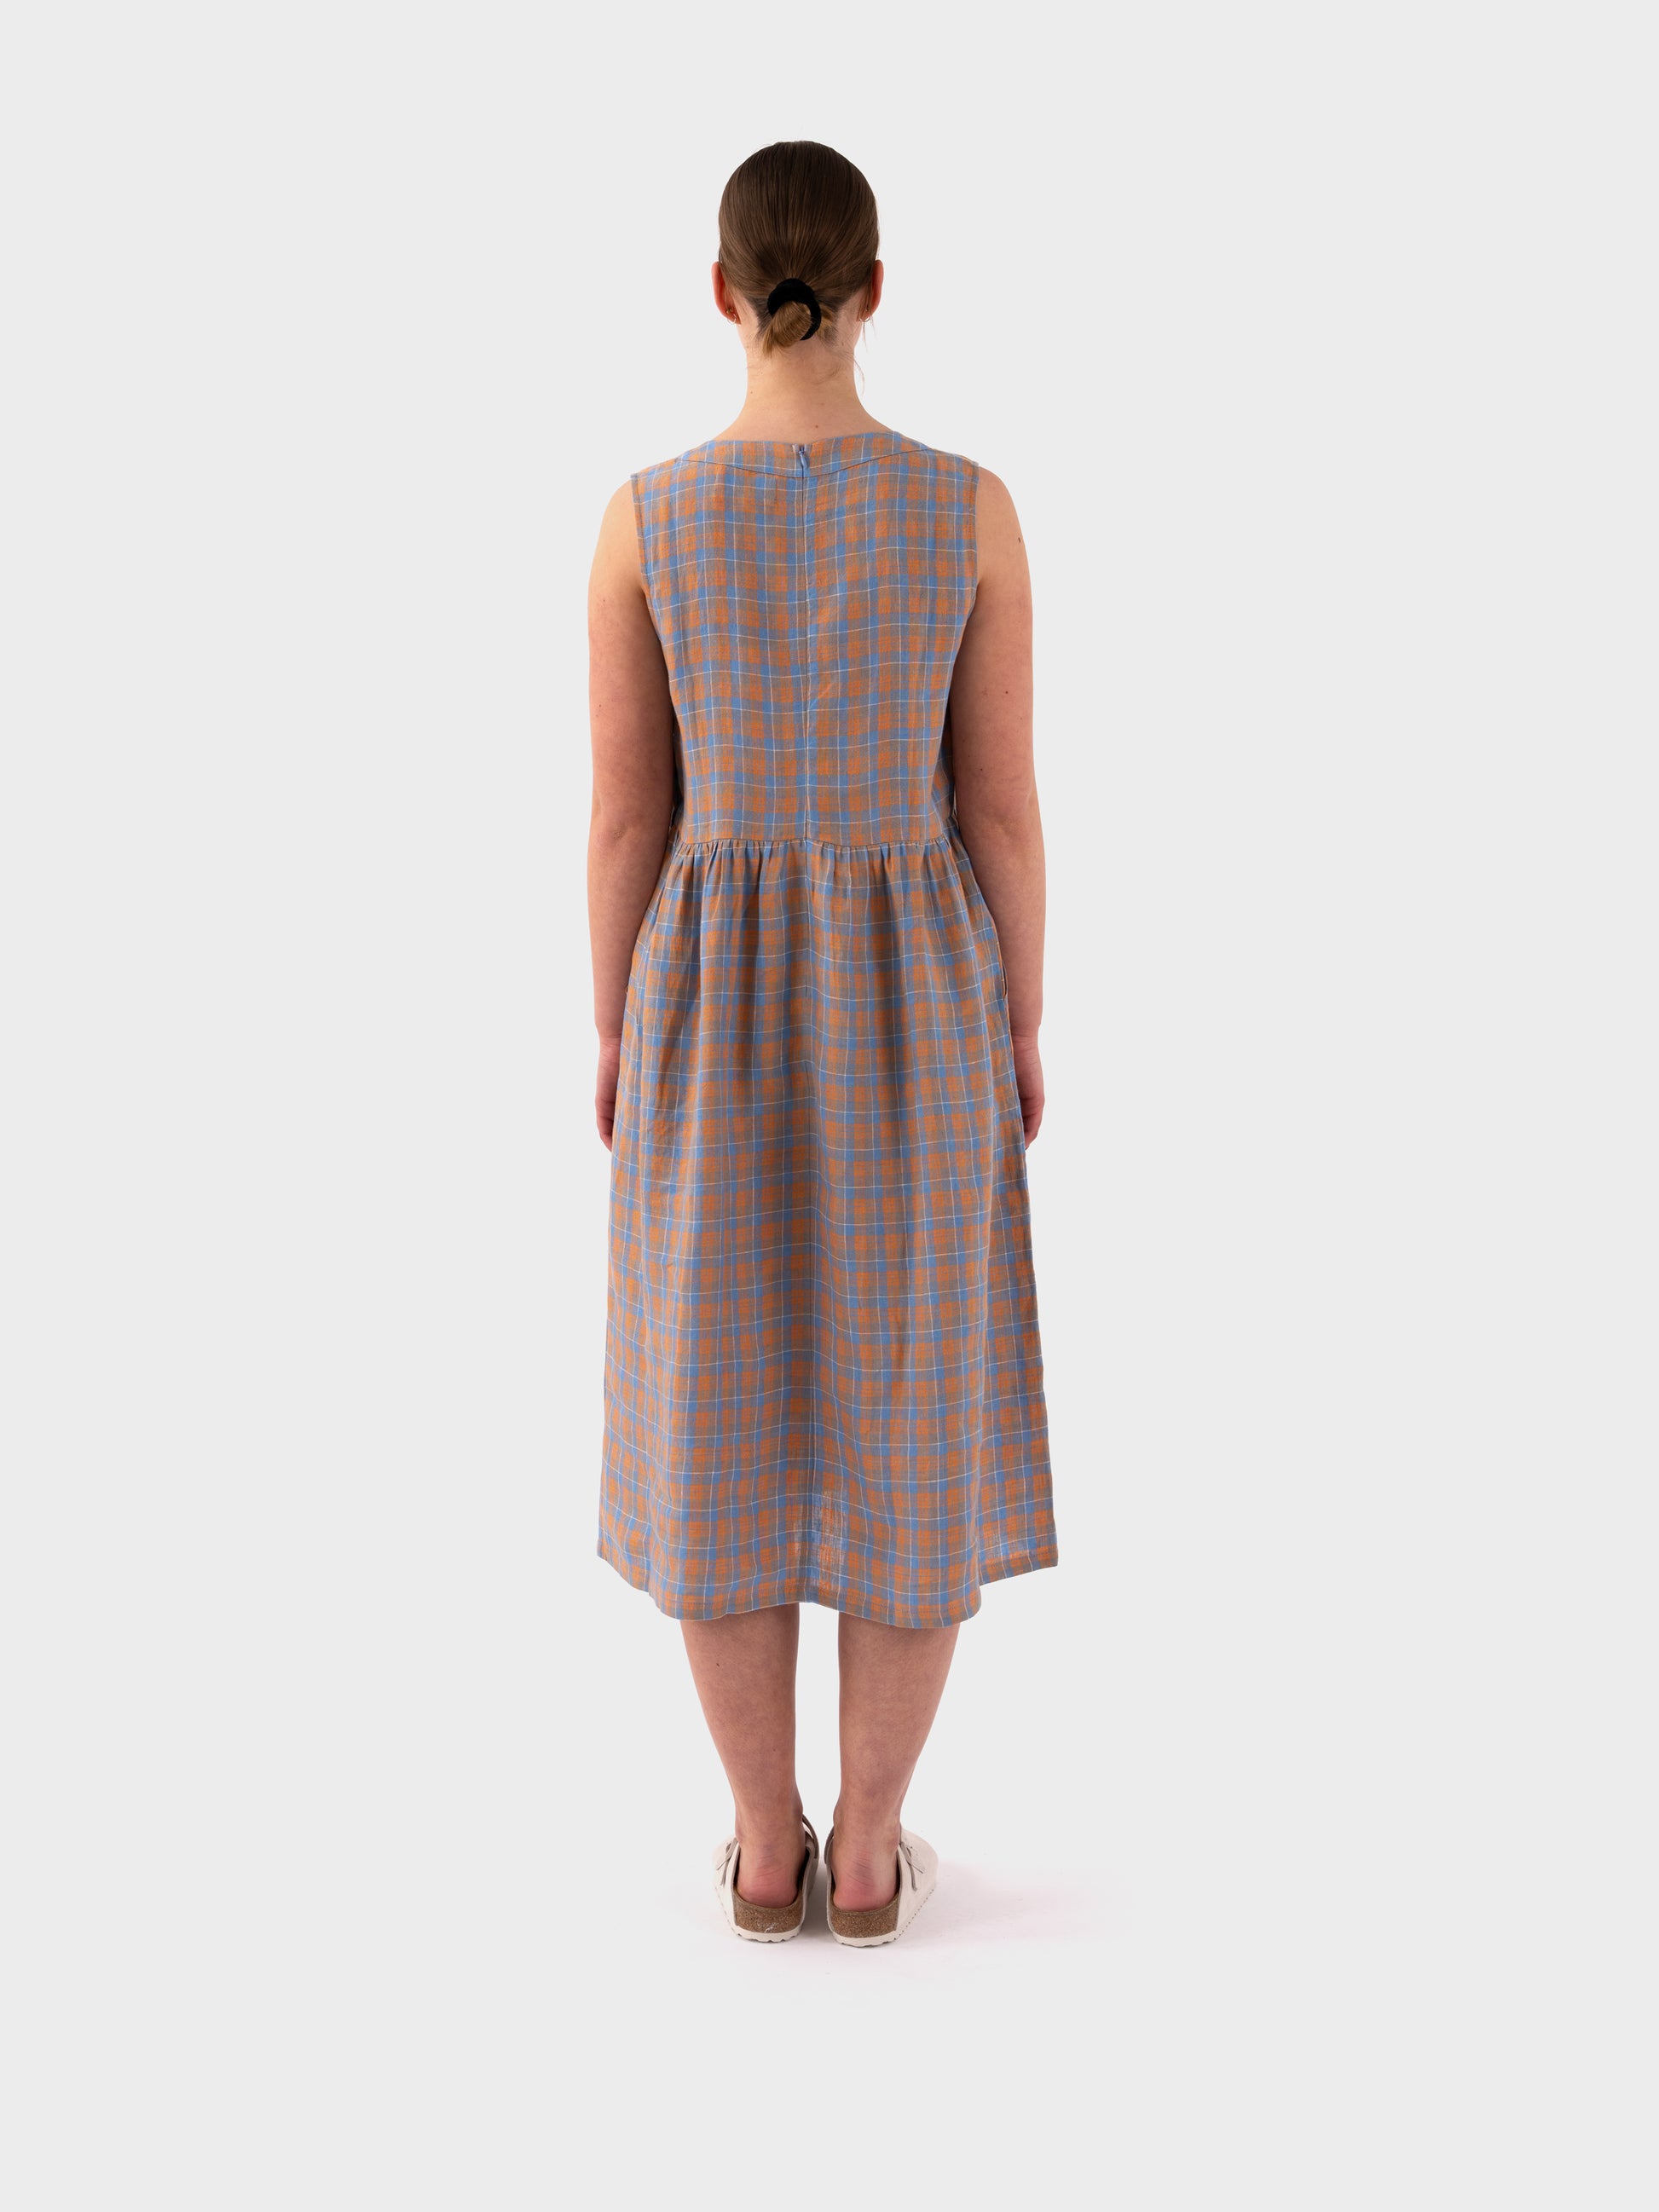 Sideline Tally Dress - Mixed Check